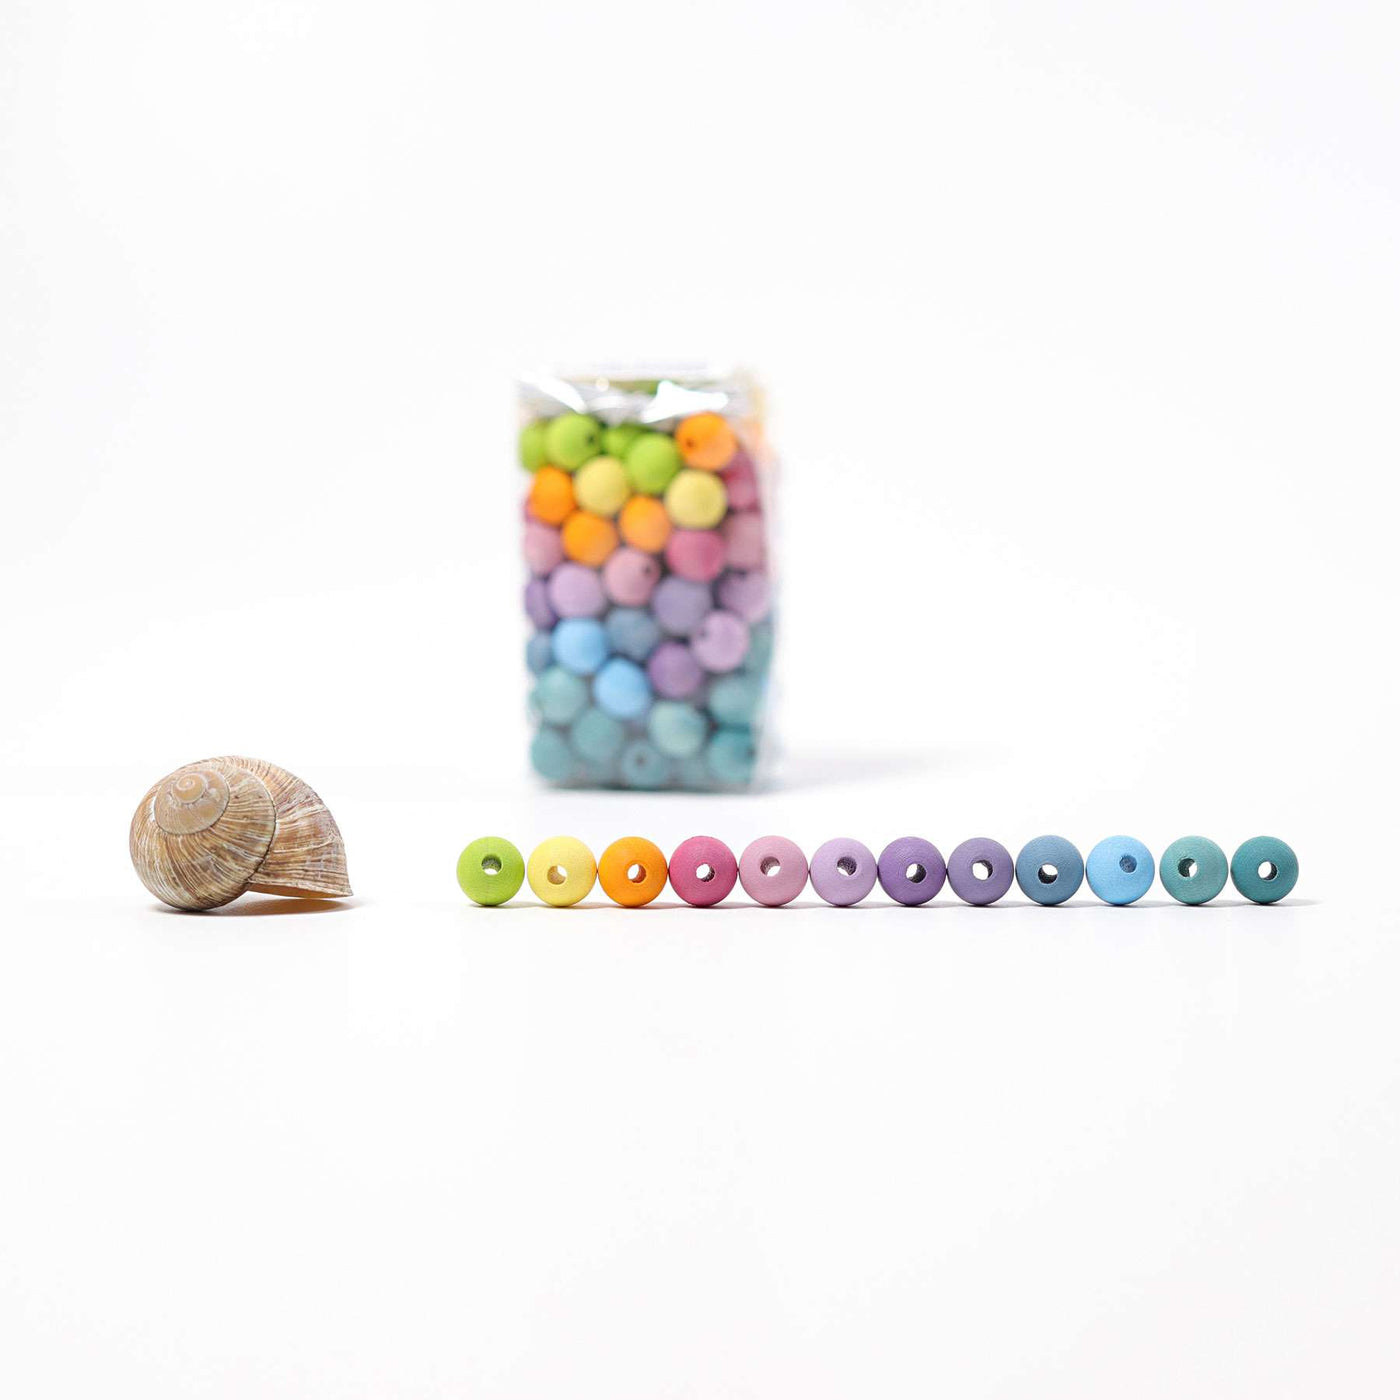 10259 Grimms 120 Small Pastel Wooden Beads